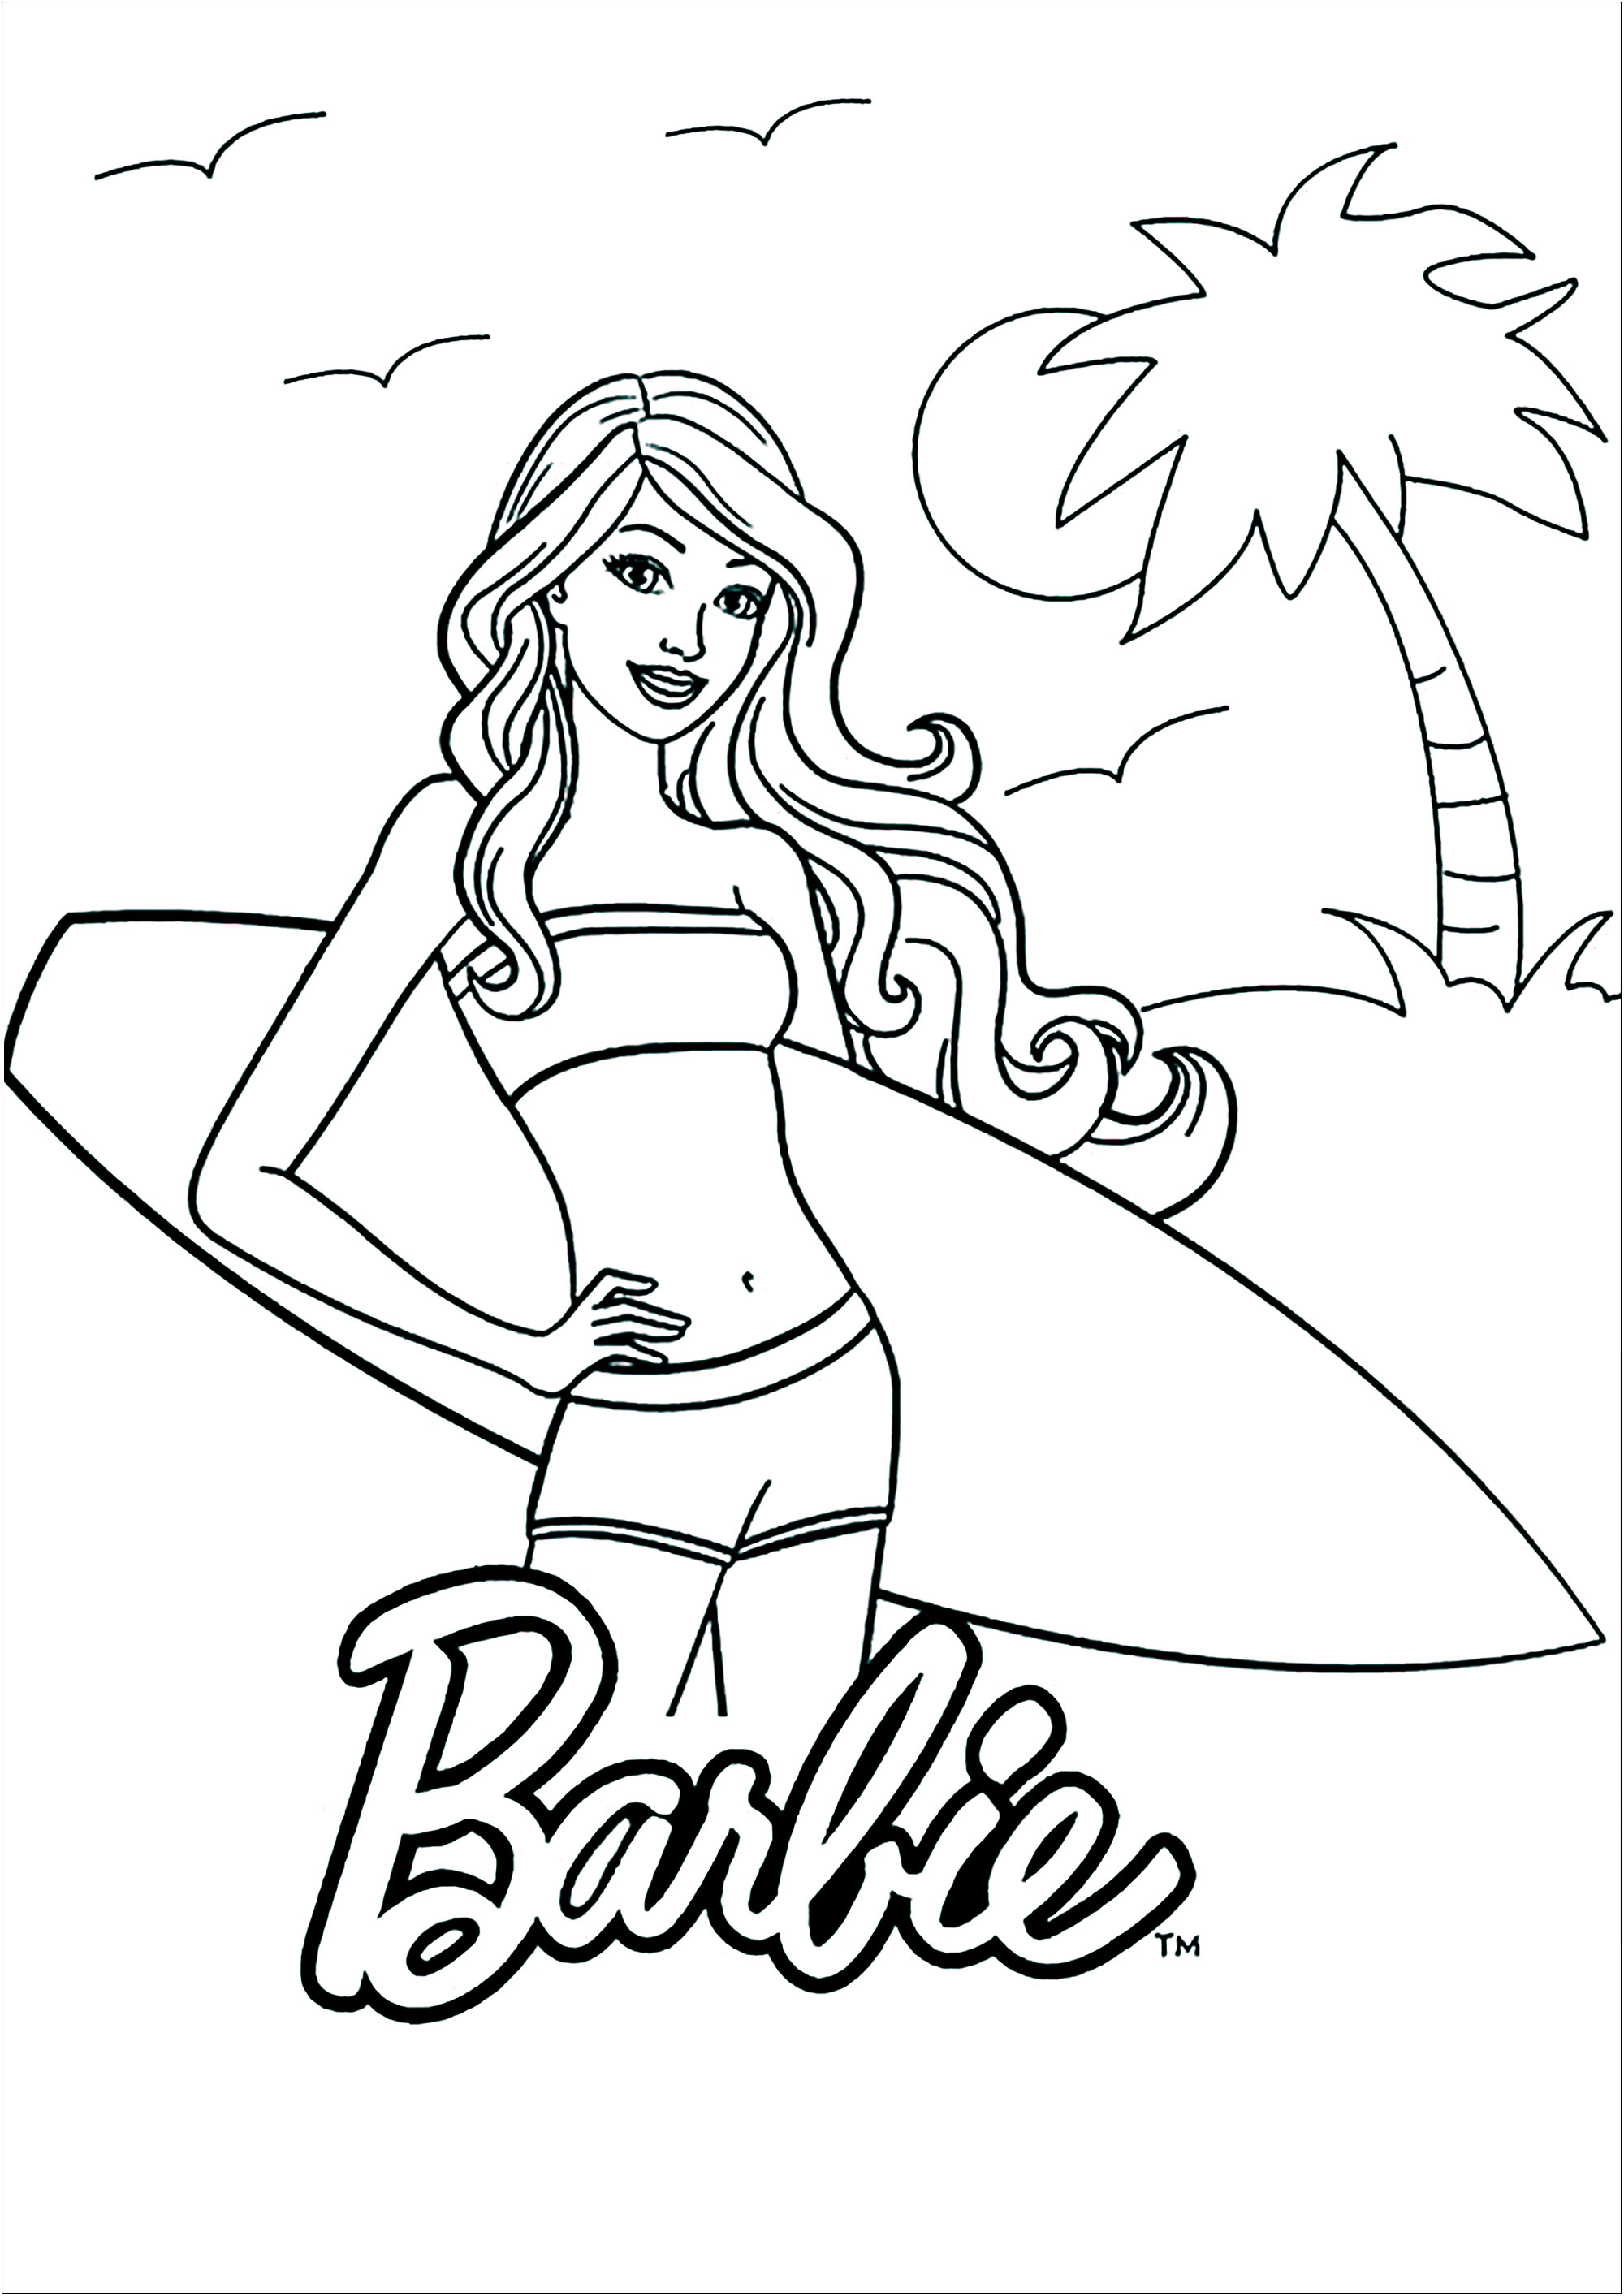 Barbie ready to surf on a beautiful beach. Simple coloring with few details